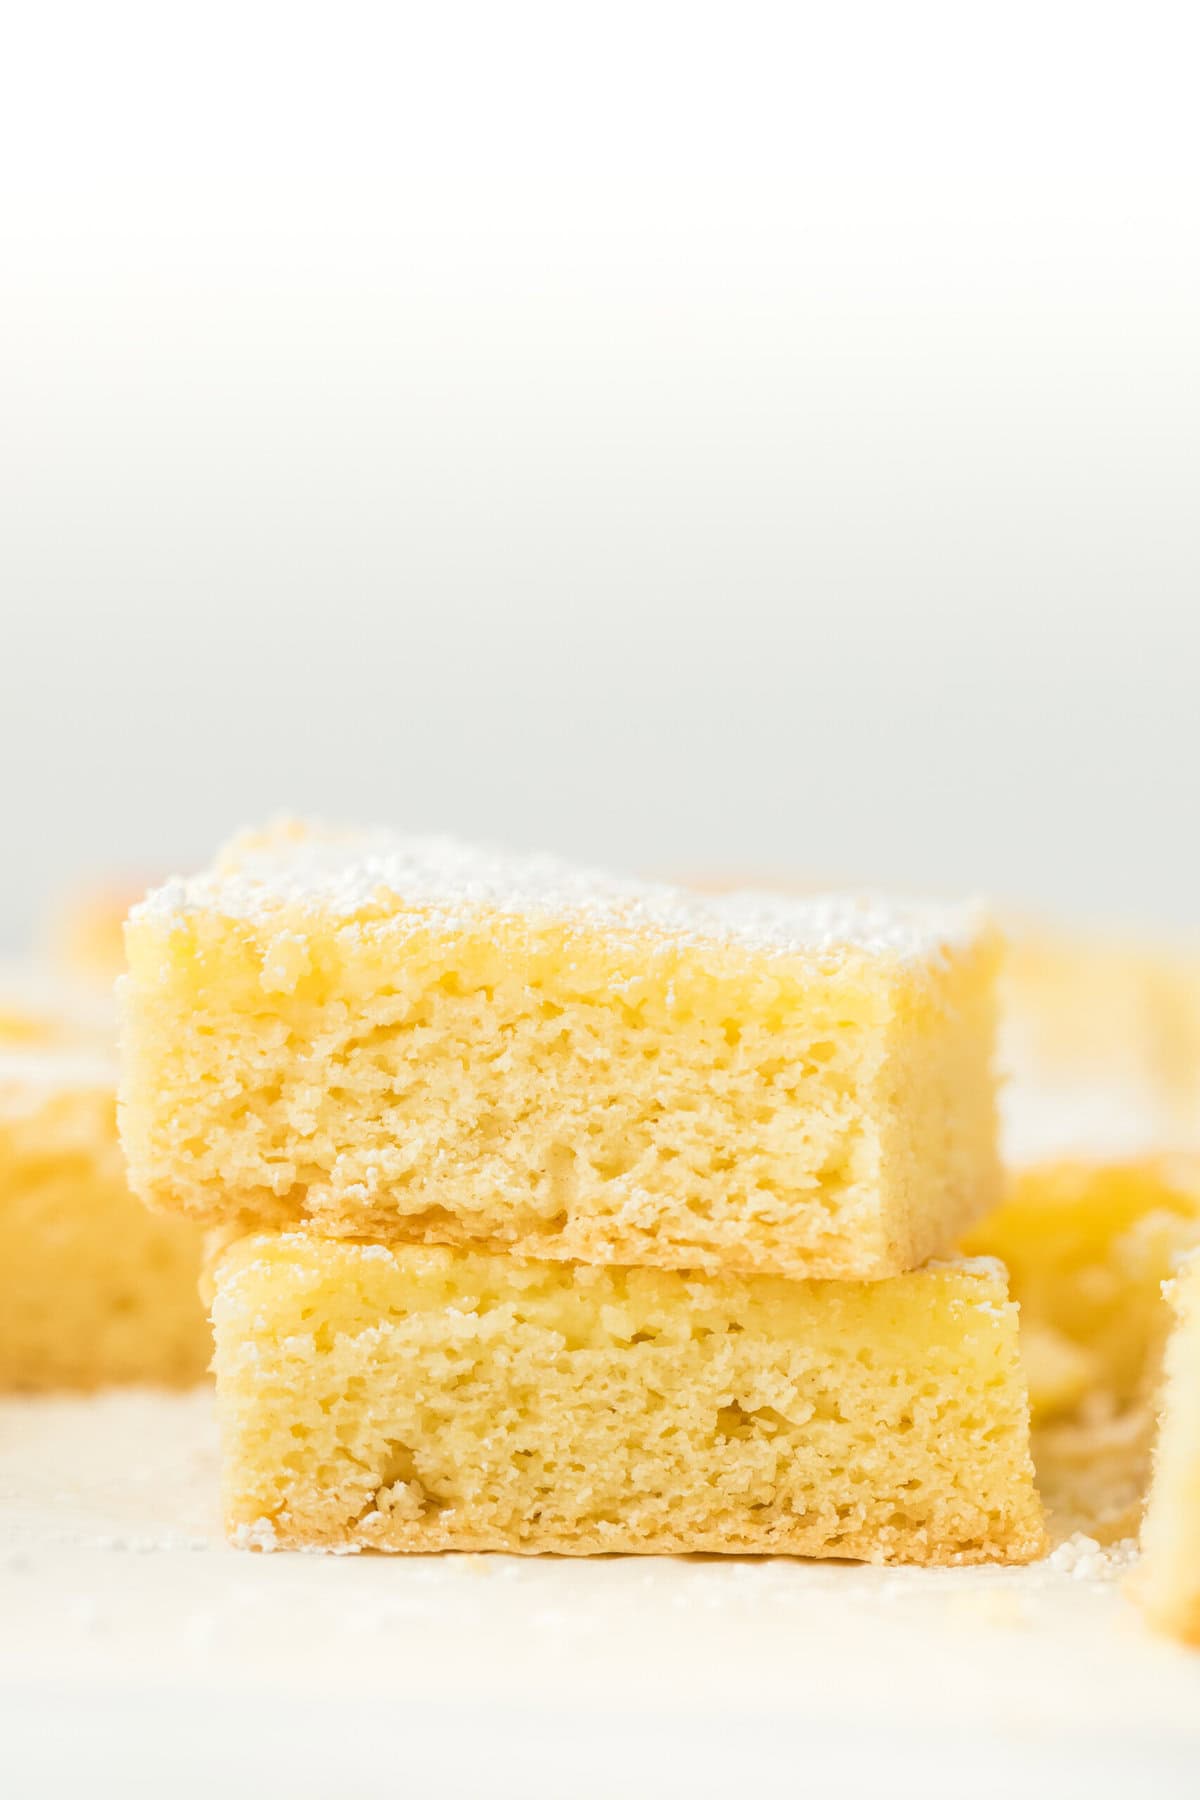 Slices of St. Louis gooey butter cake stacked on top of each other in white background